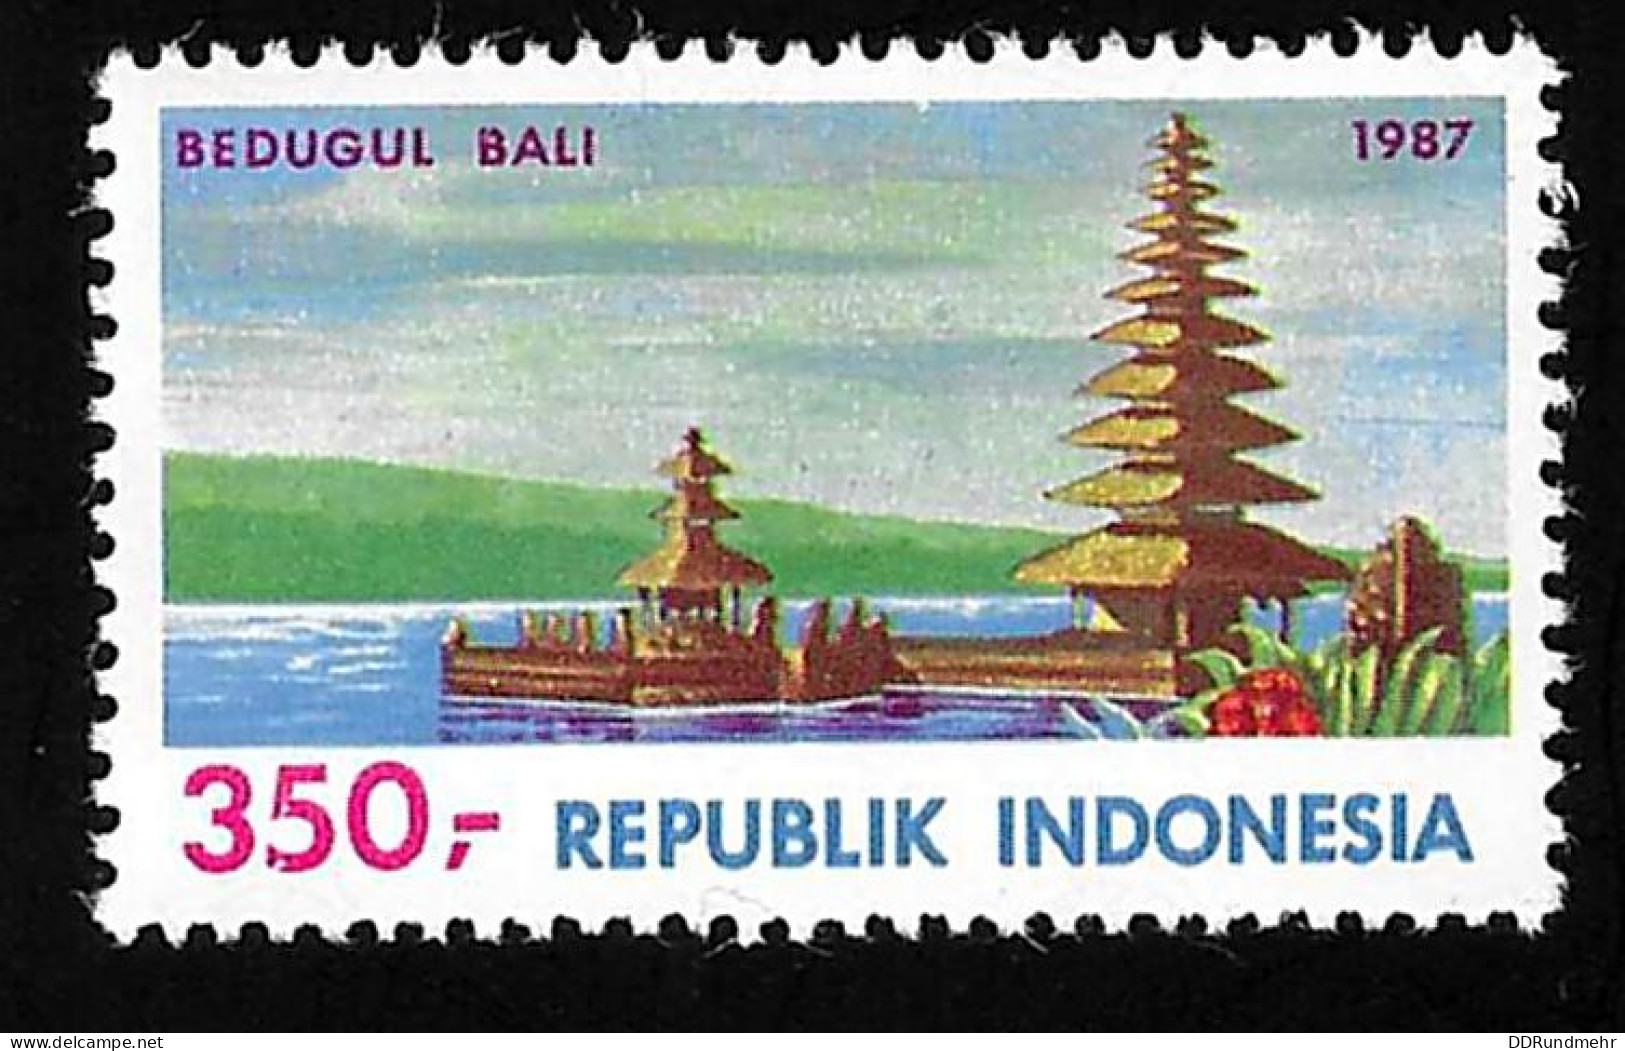 1987 Bedogul  Michel ID 1238 Stamp Number ID 1330 Yvert Et Tellier ID 1126 Stanley Gibbons ID 1861 Xx MNH - Indonesia